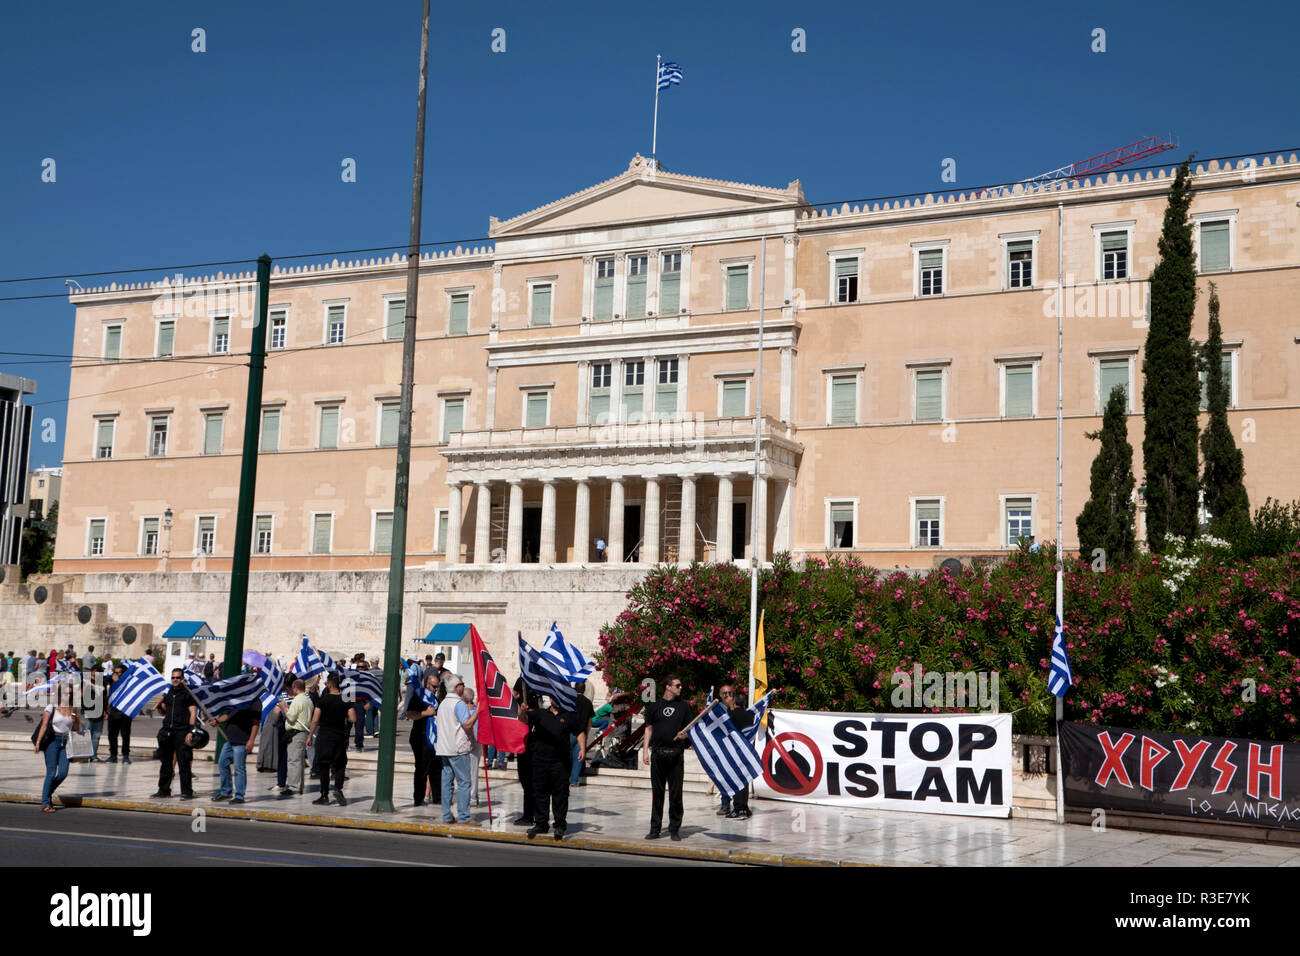 Manifestation anti islam house of parliament building place Syntagma Athènes Grèce Banque D'Images